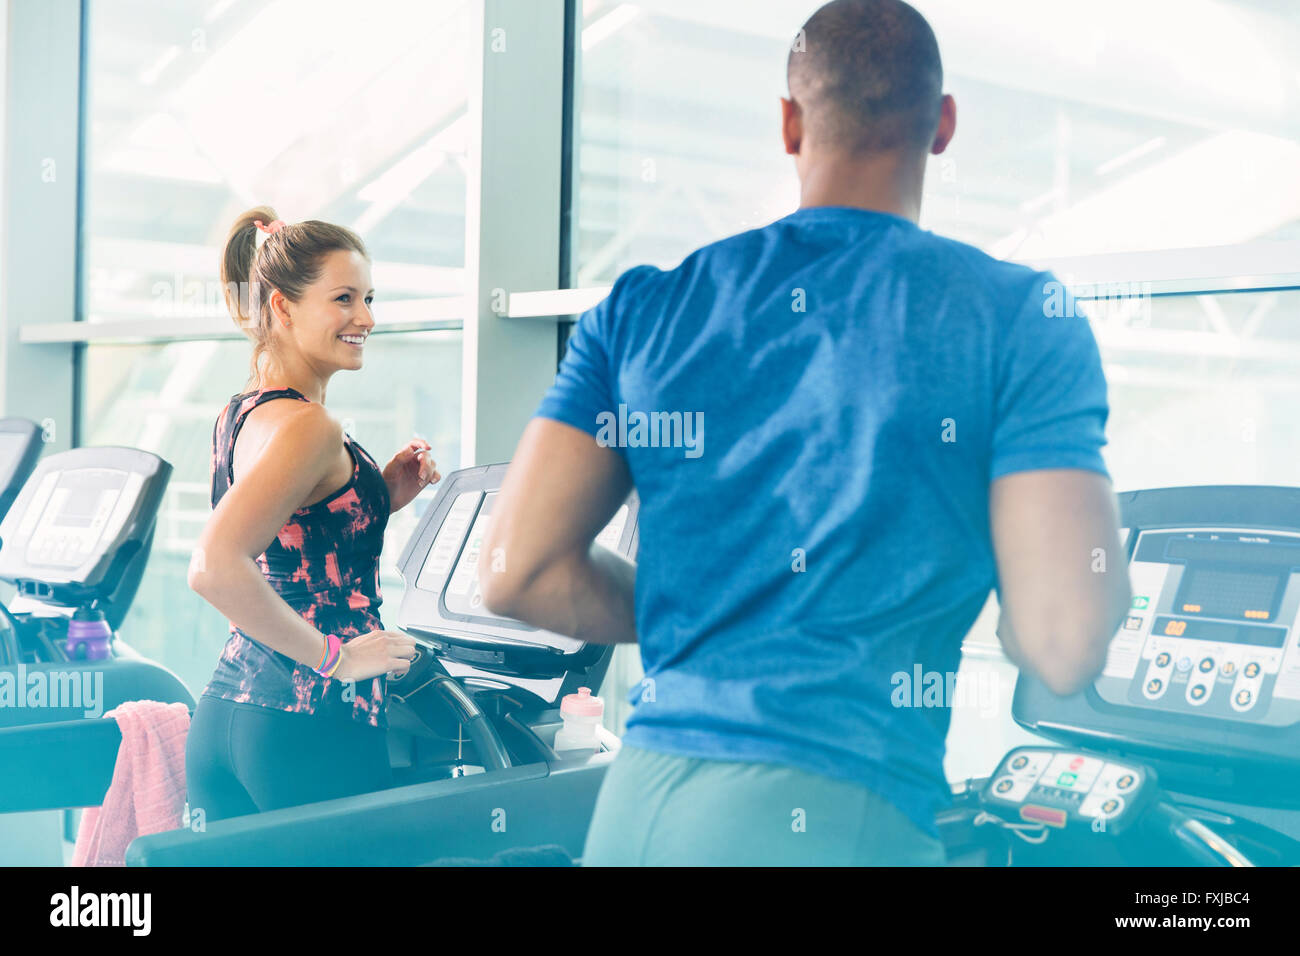 Man and woman jogging on treadmills at gym Stock Photo